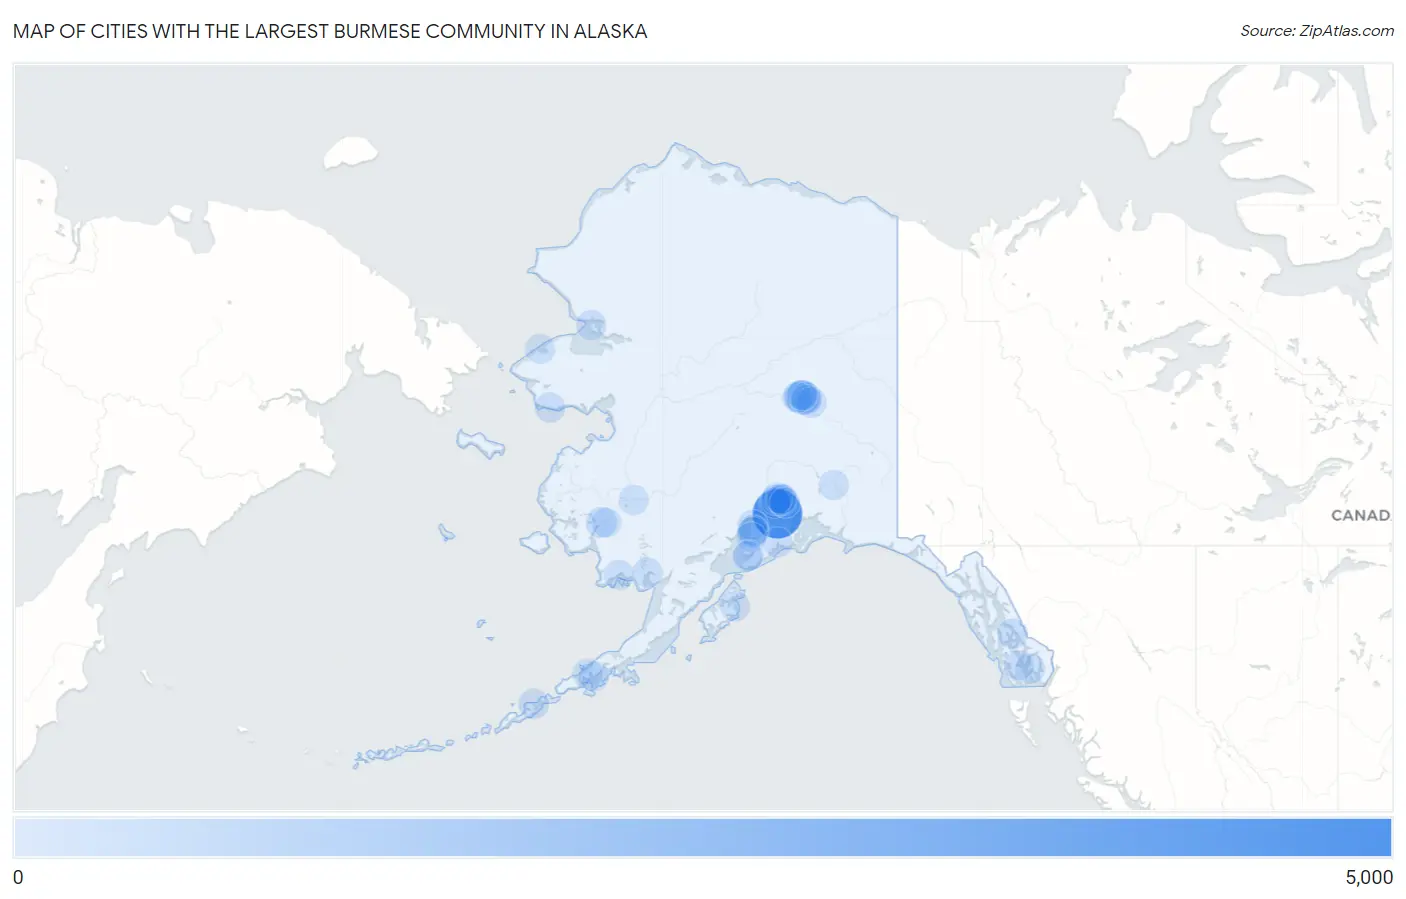 Cities with the Largest Burmese Community in Alaska Map